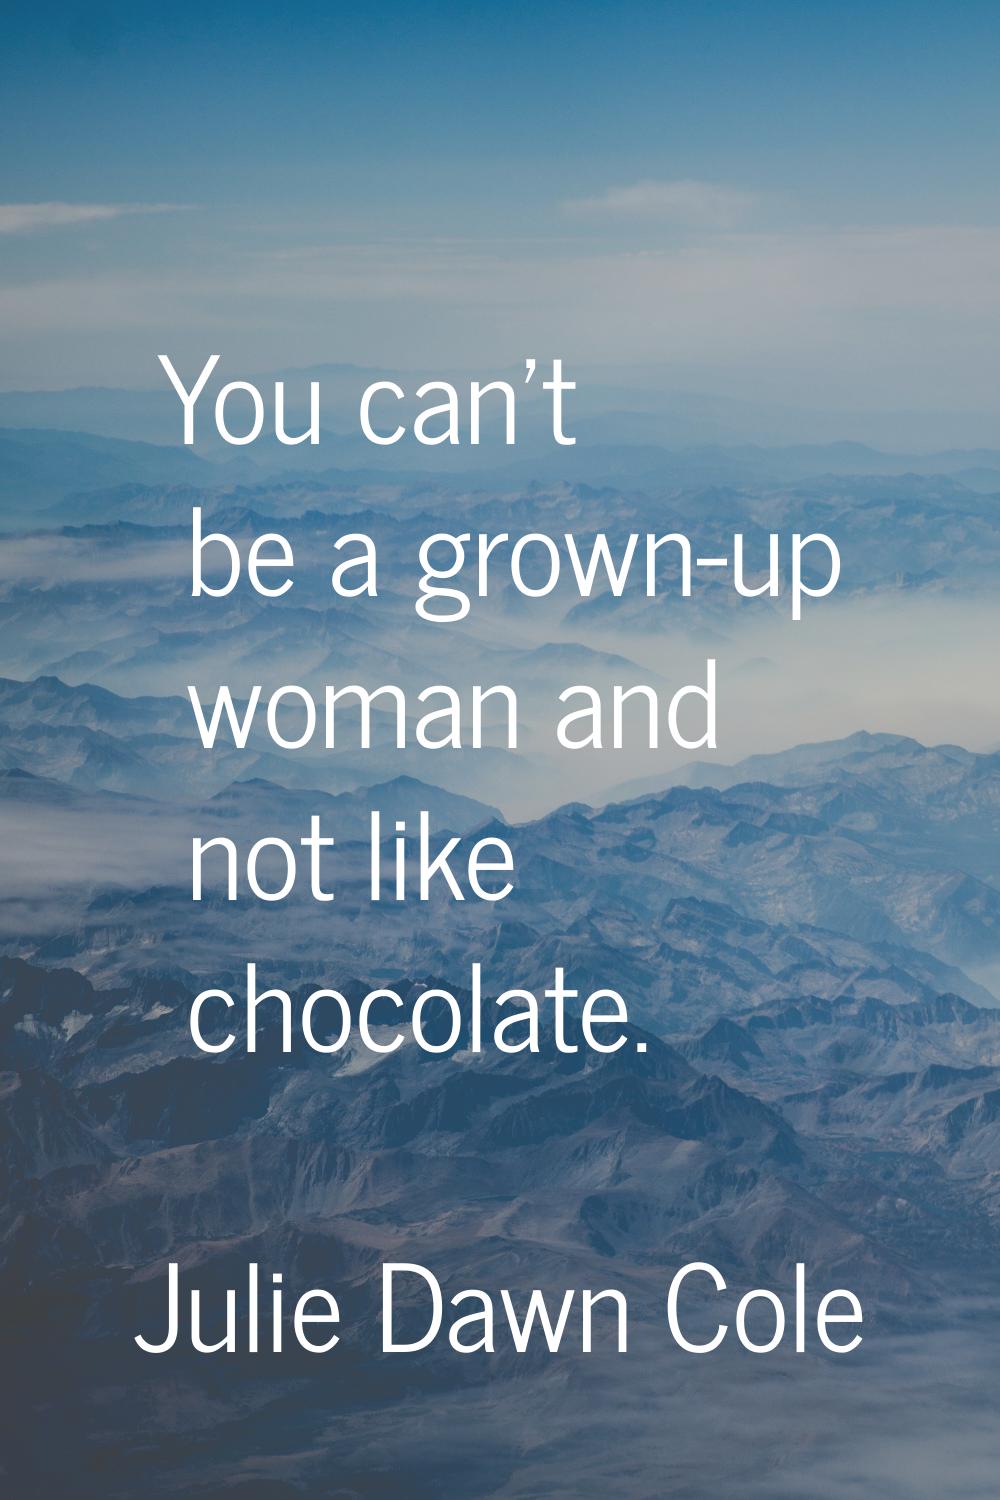 You can't be a grown-up woman and not like chocolate.